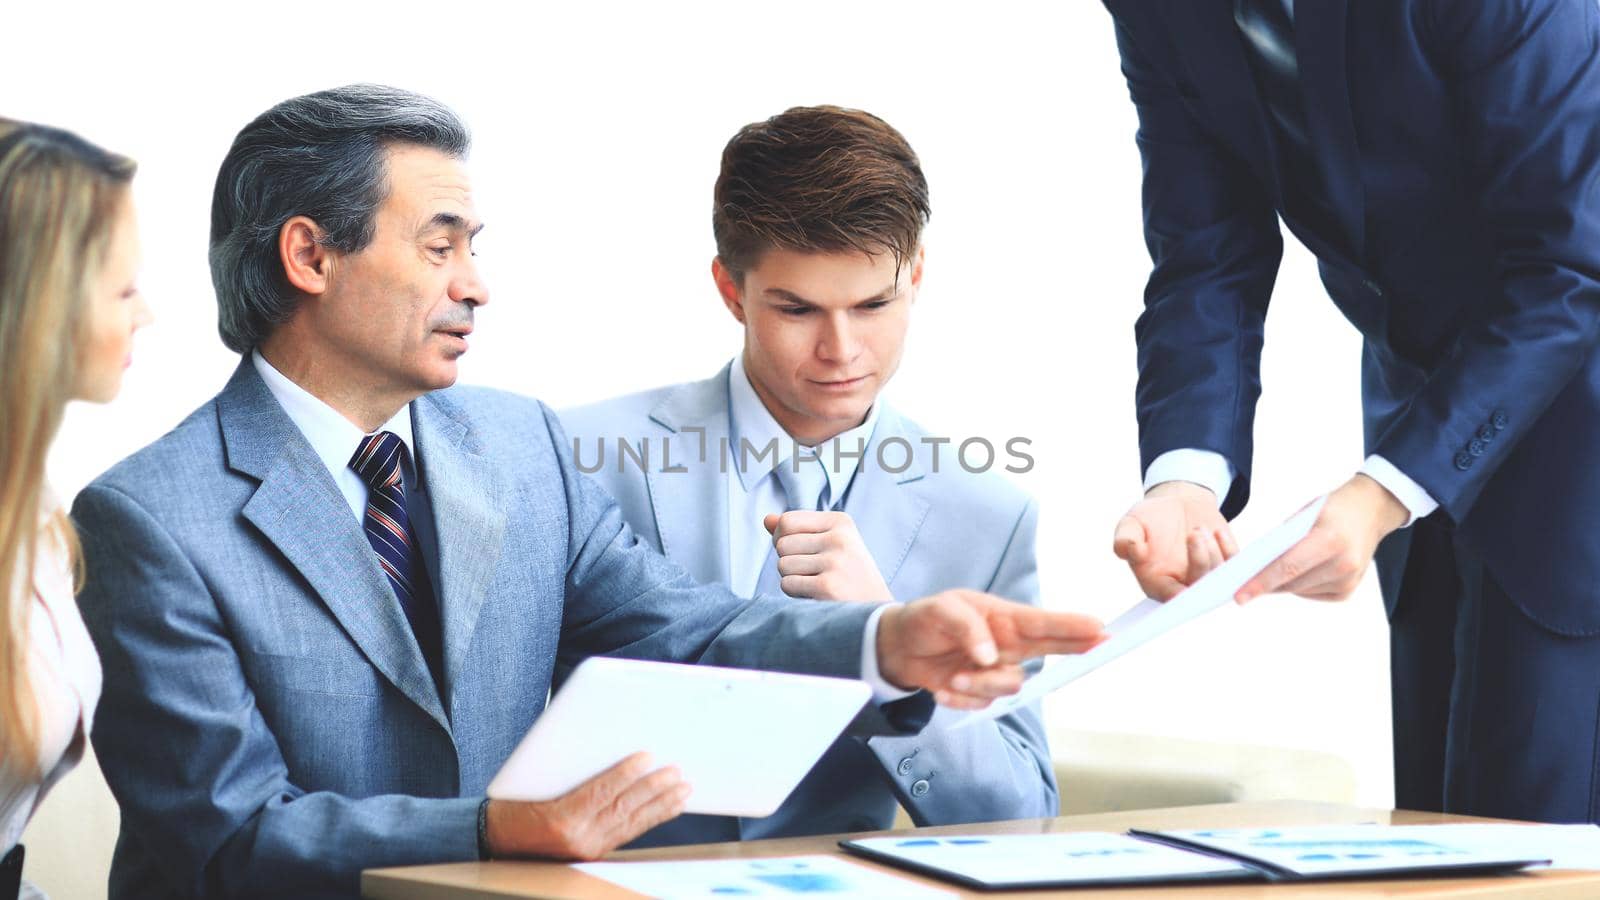 Business team interviewing young applicant by SmartPhotoLab